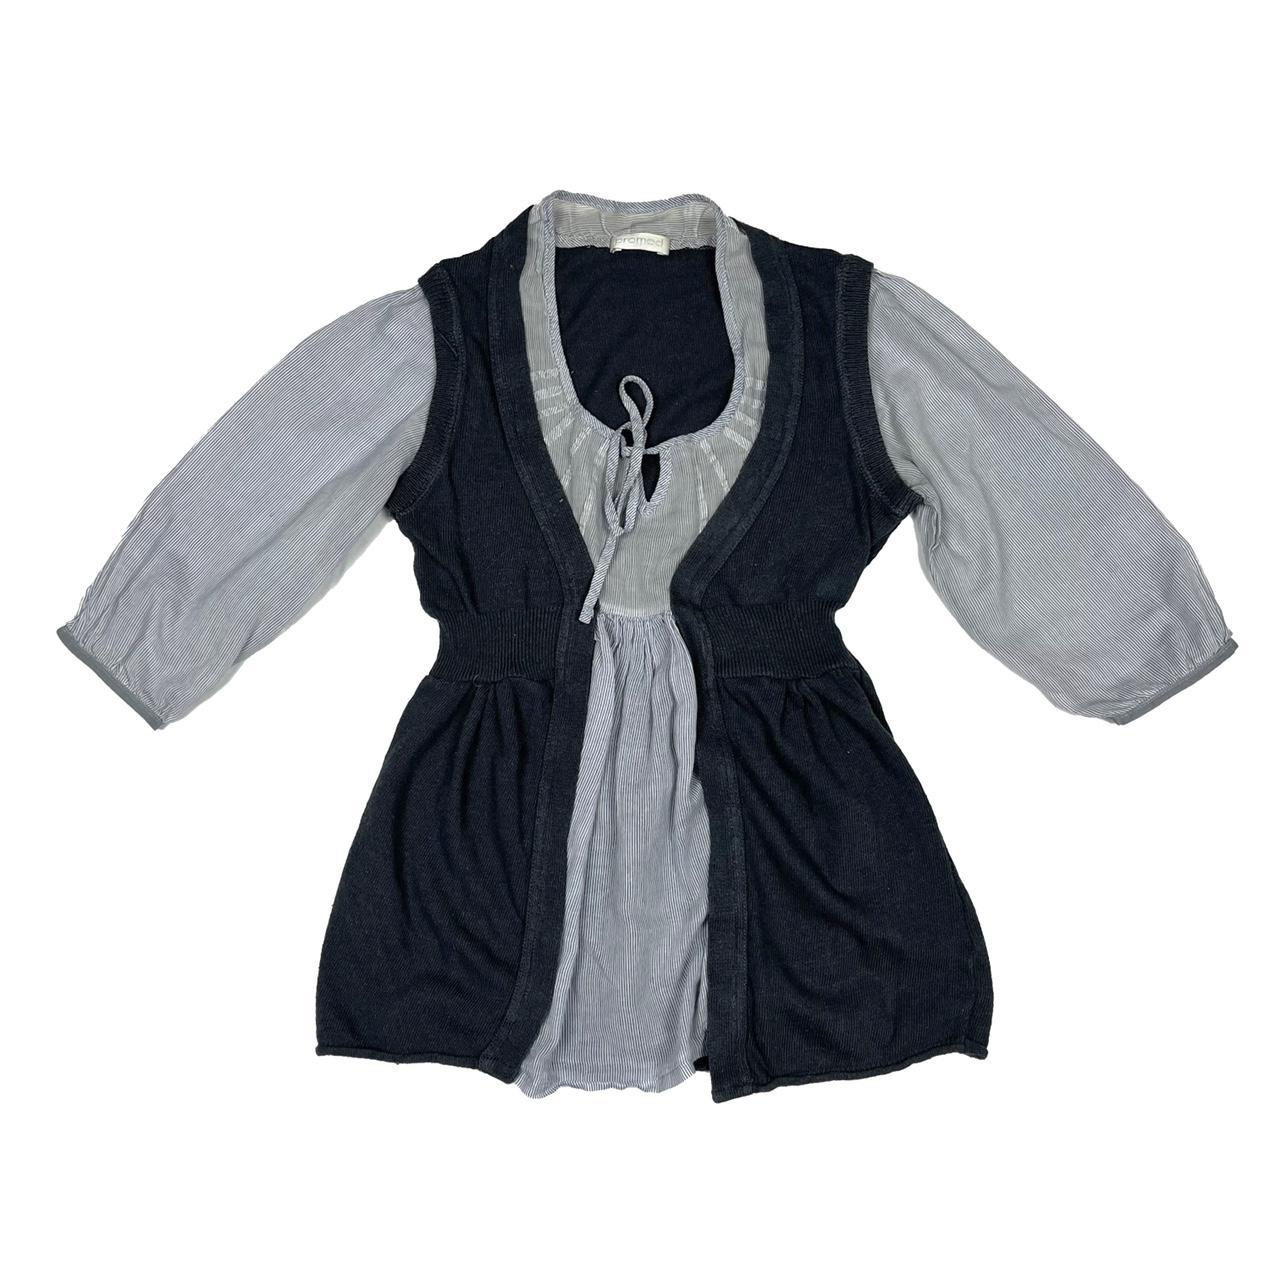 Women's Navy and Grey Blouse